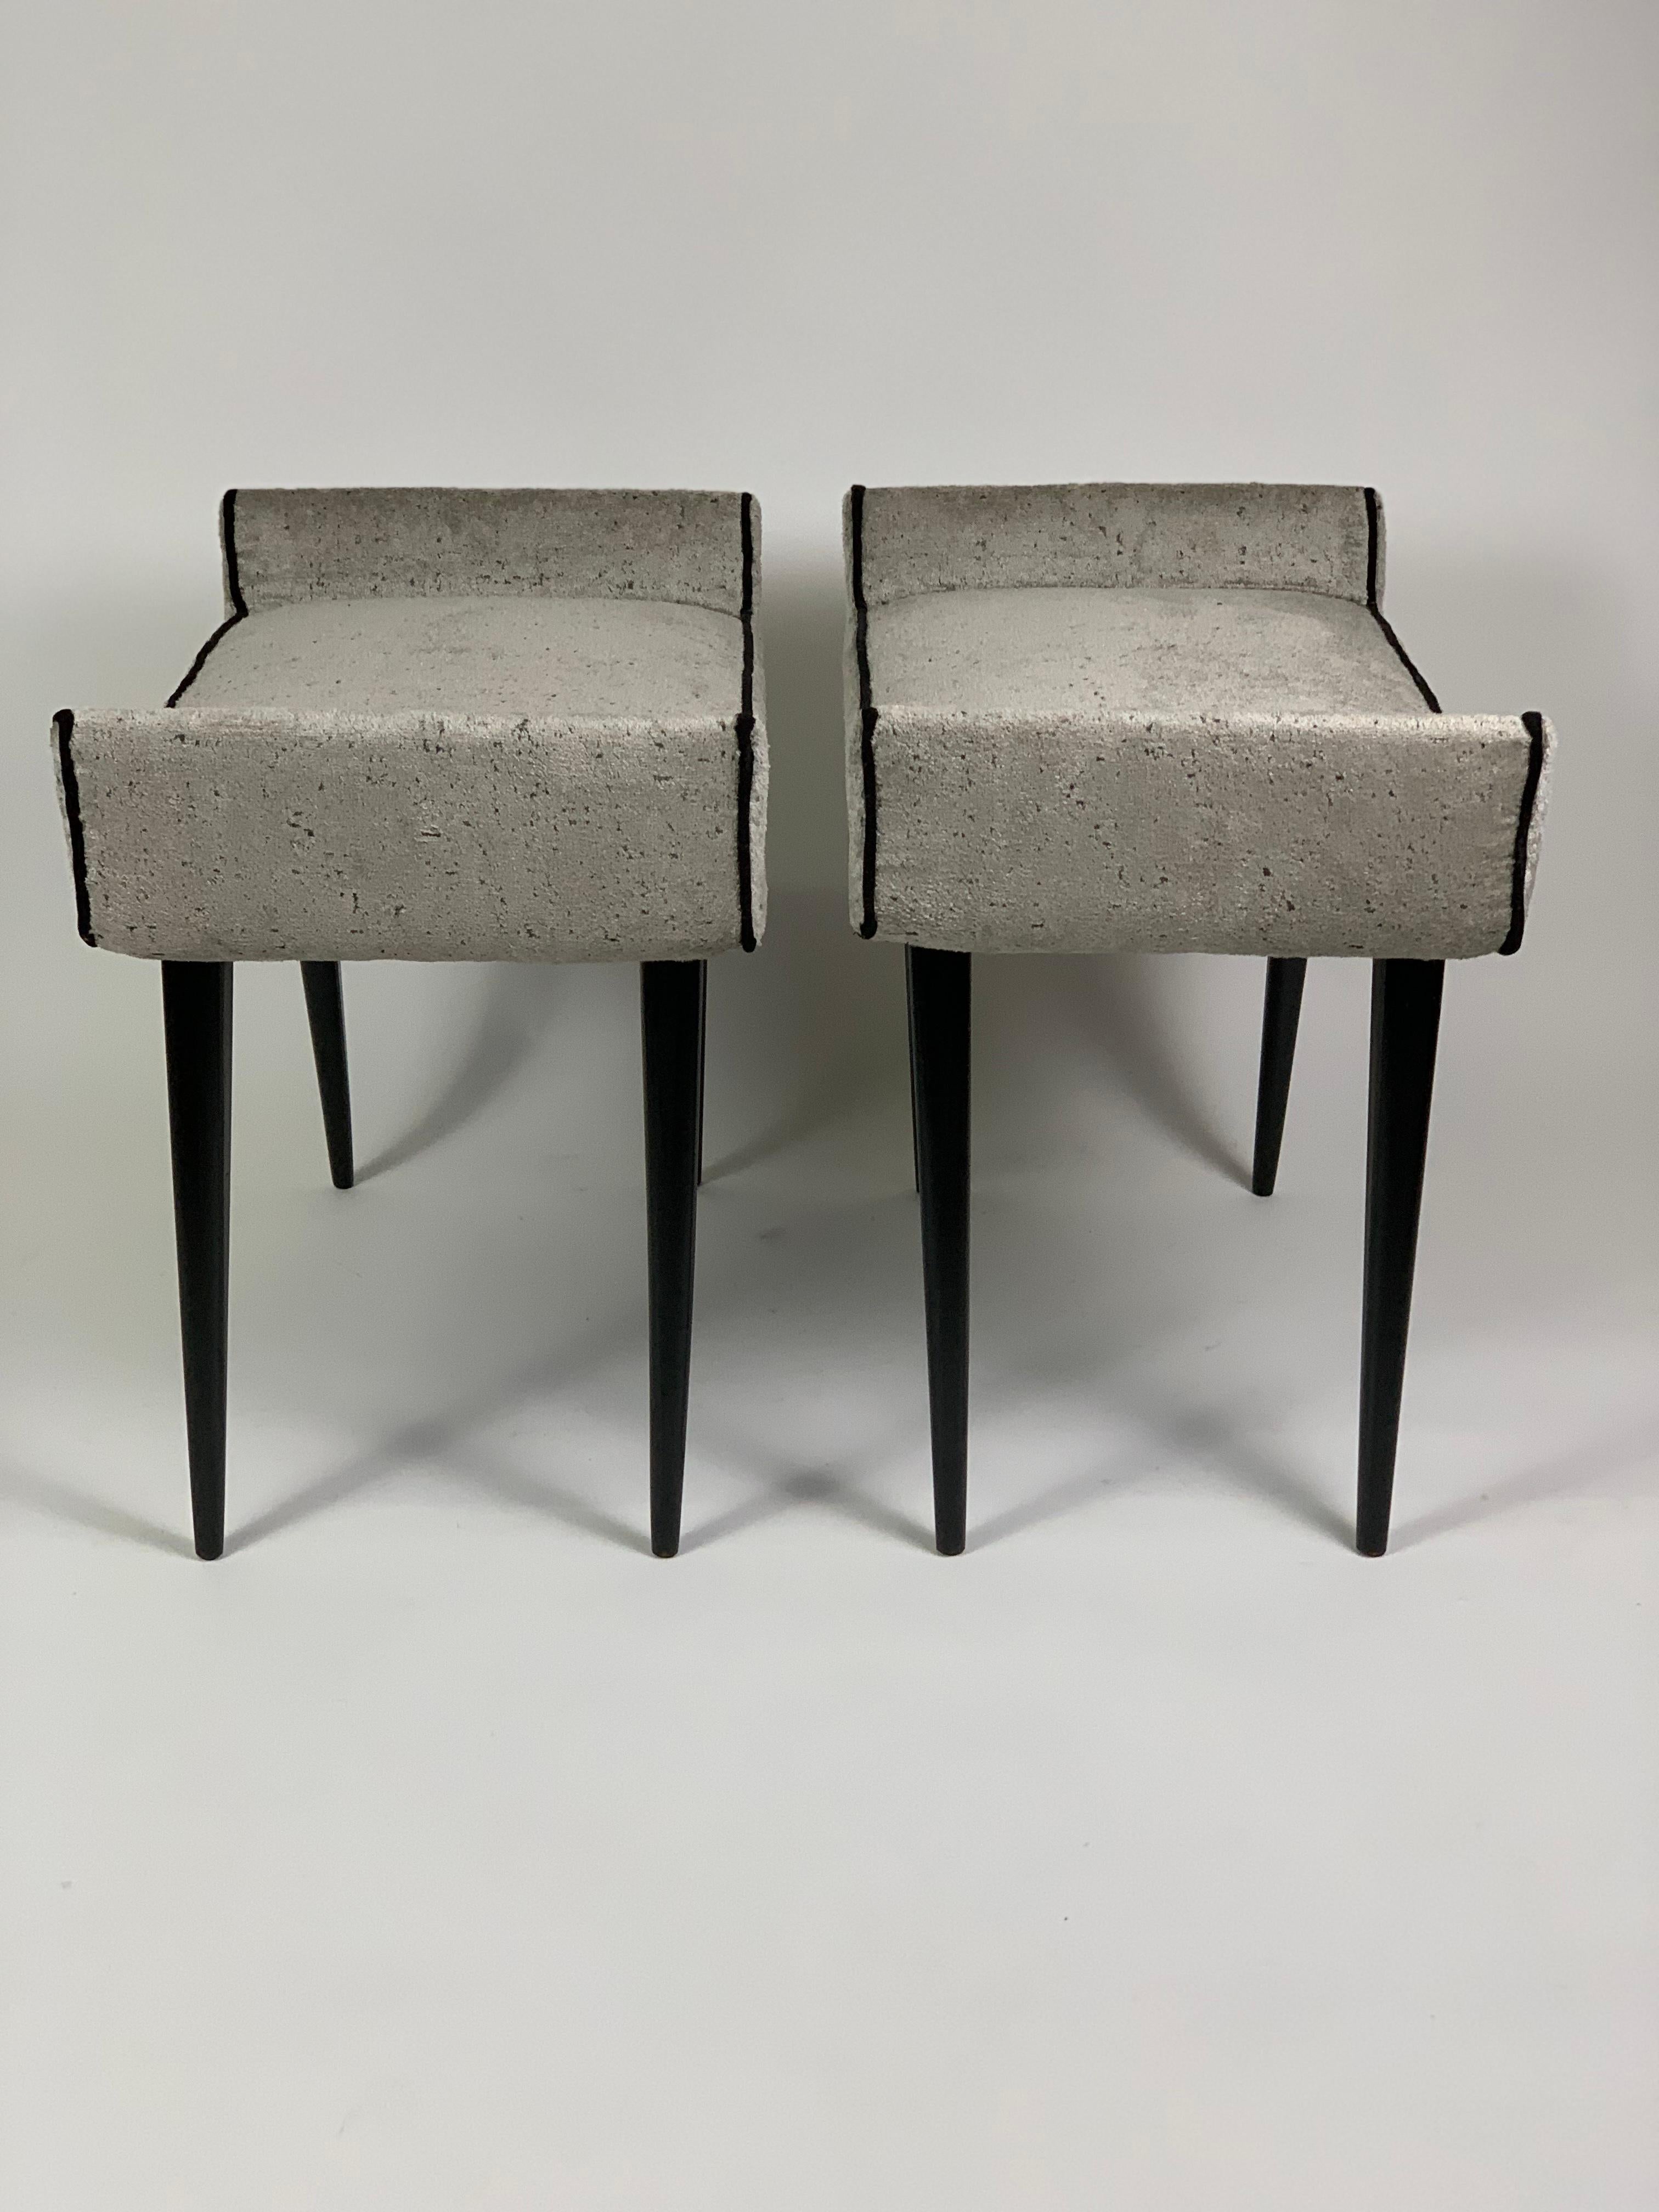 Lacquered Pair of Italian Stools from 1950th Manufacturyied by I.S.A. Bergamo